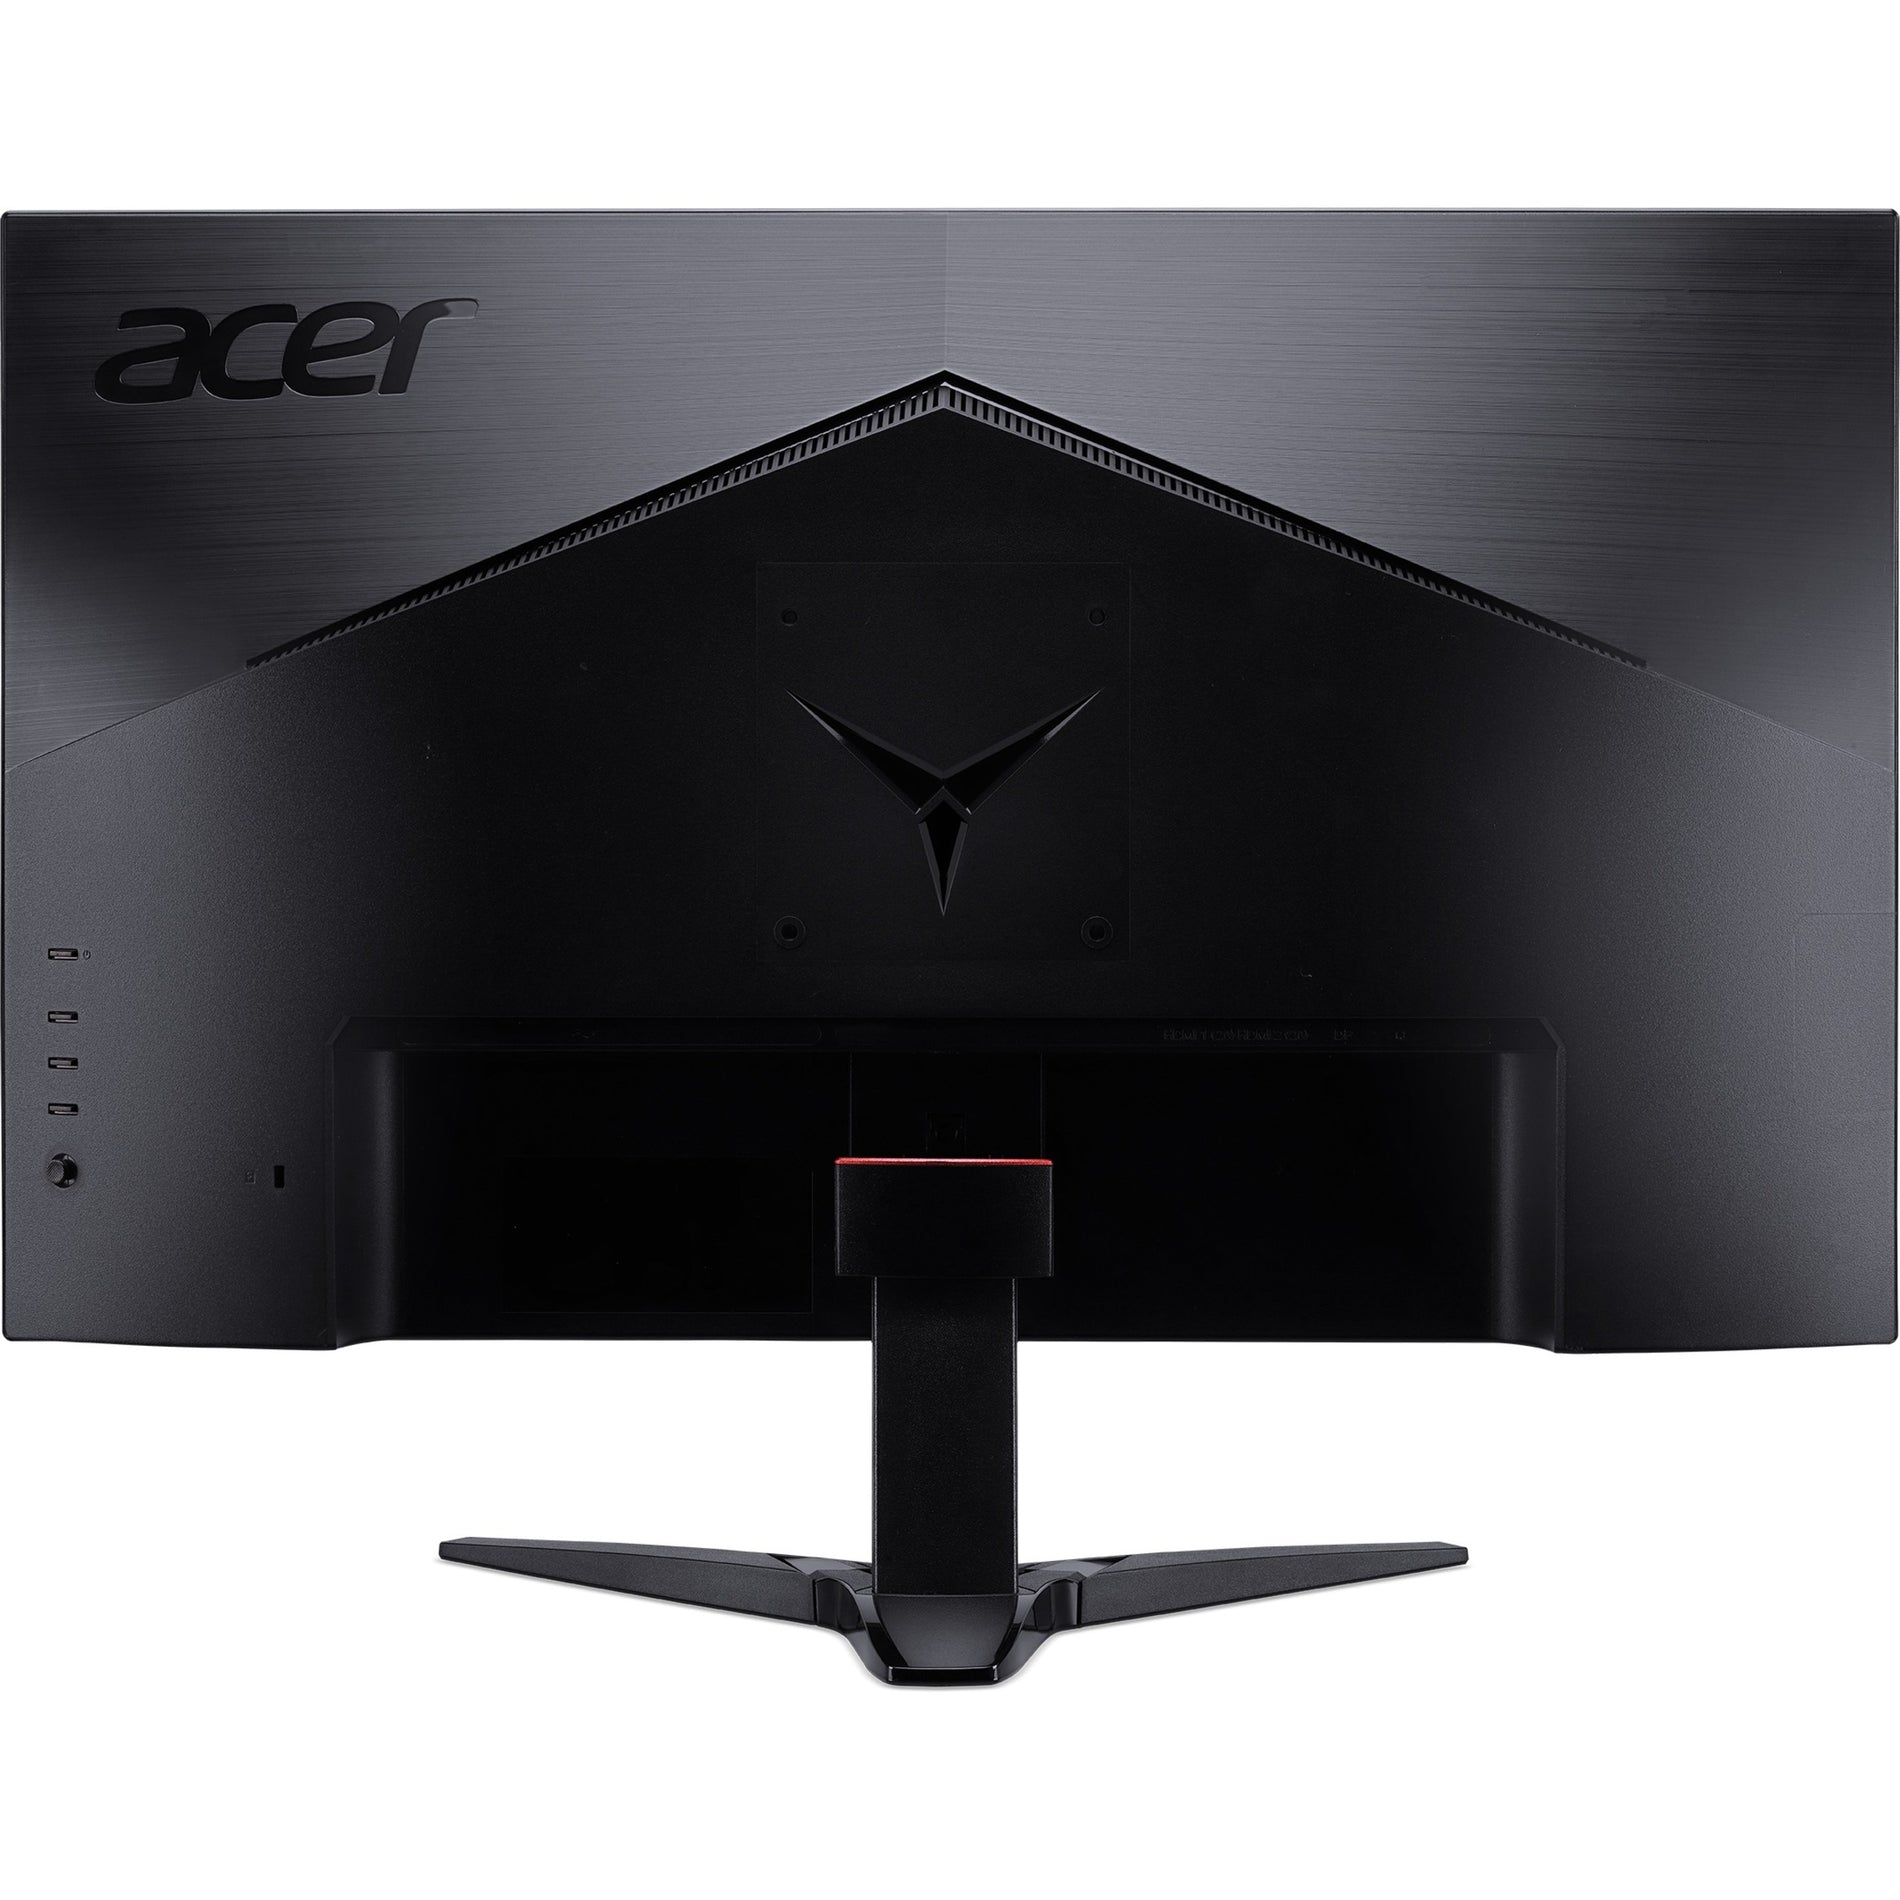 Acer KG272 S 27" Full HD LCD Monitor - Black [Discontinued]